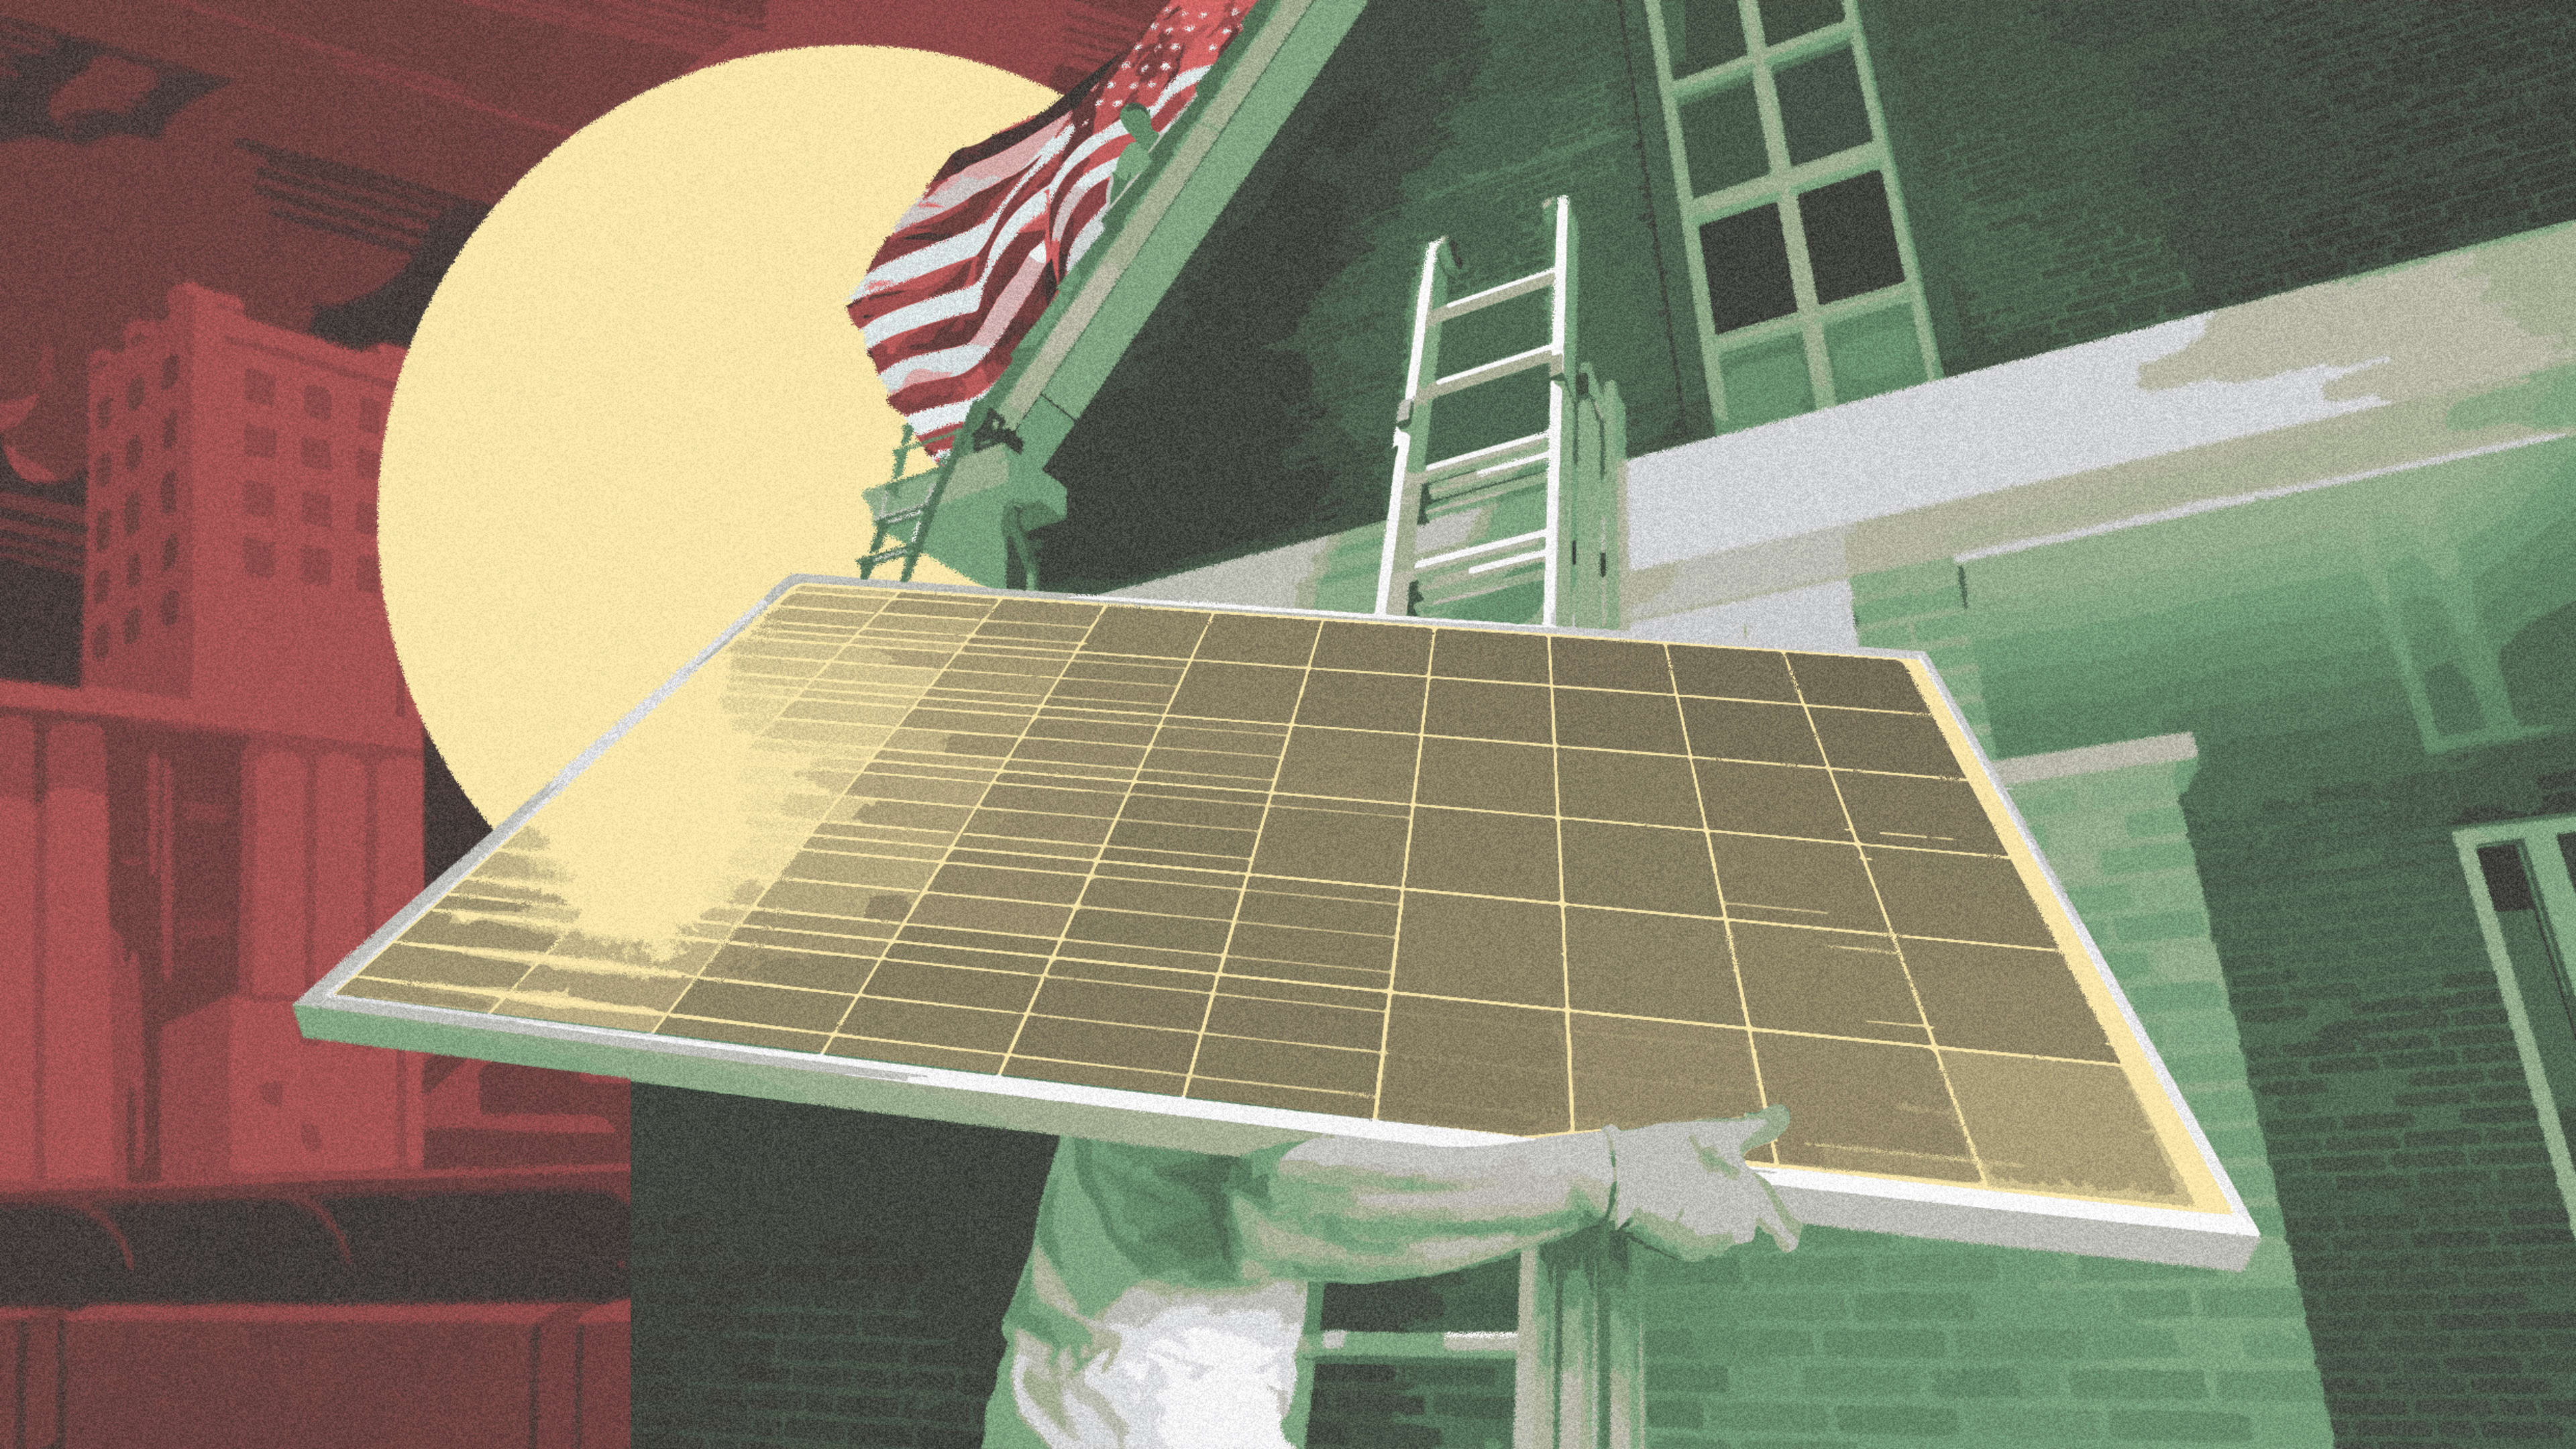 The Green New Deal could change the way America builds—here’s how